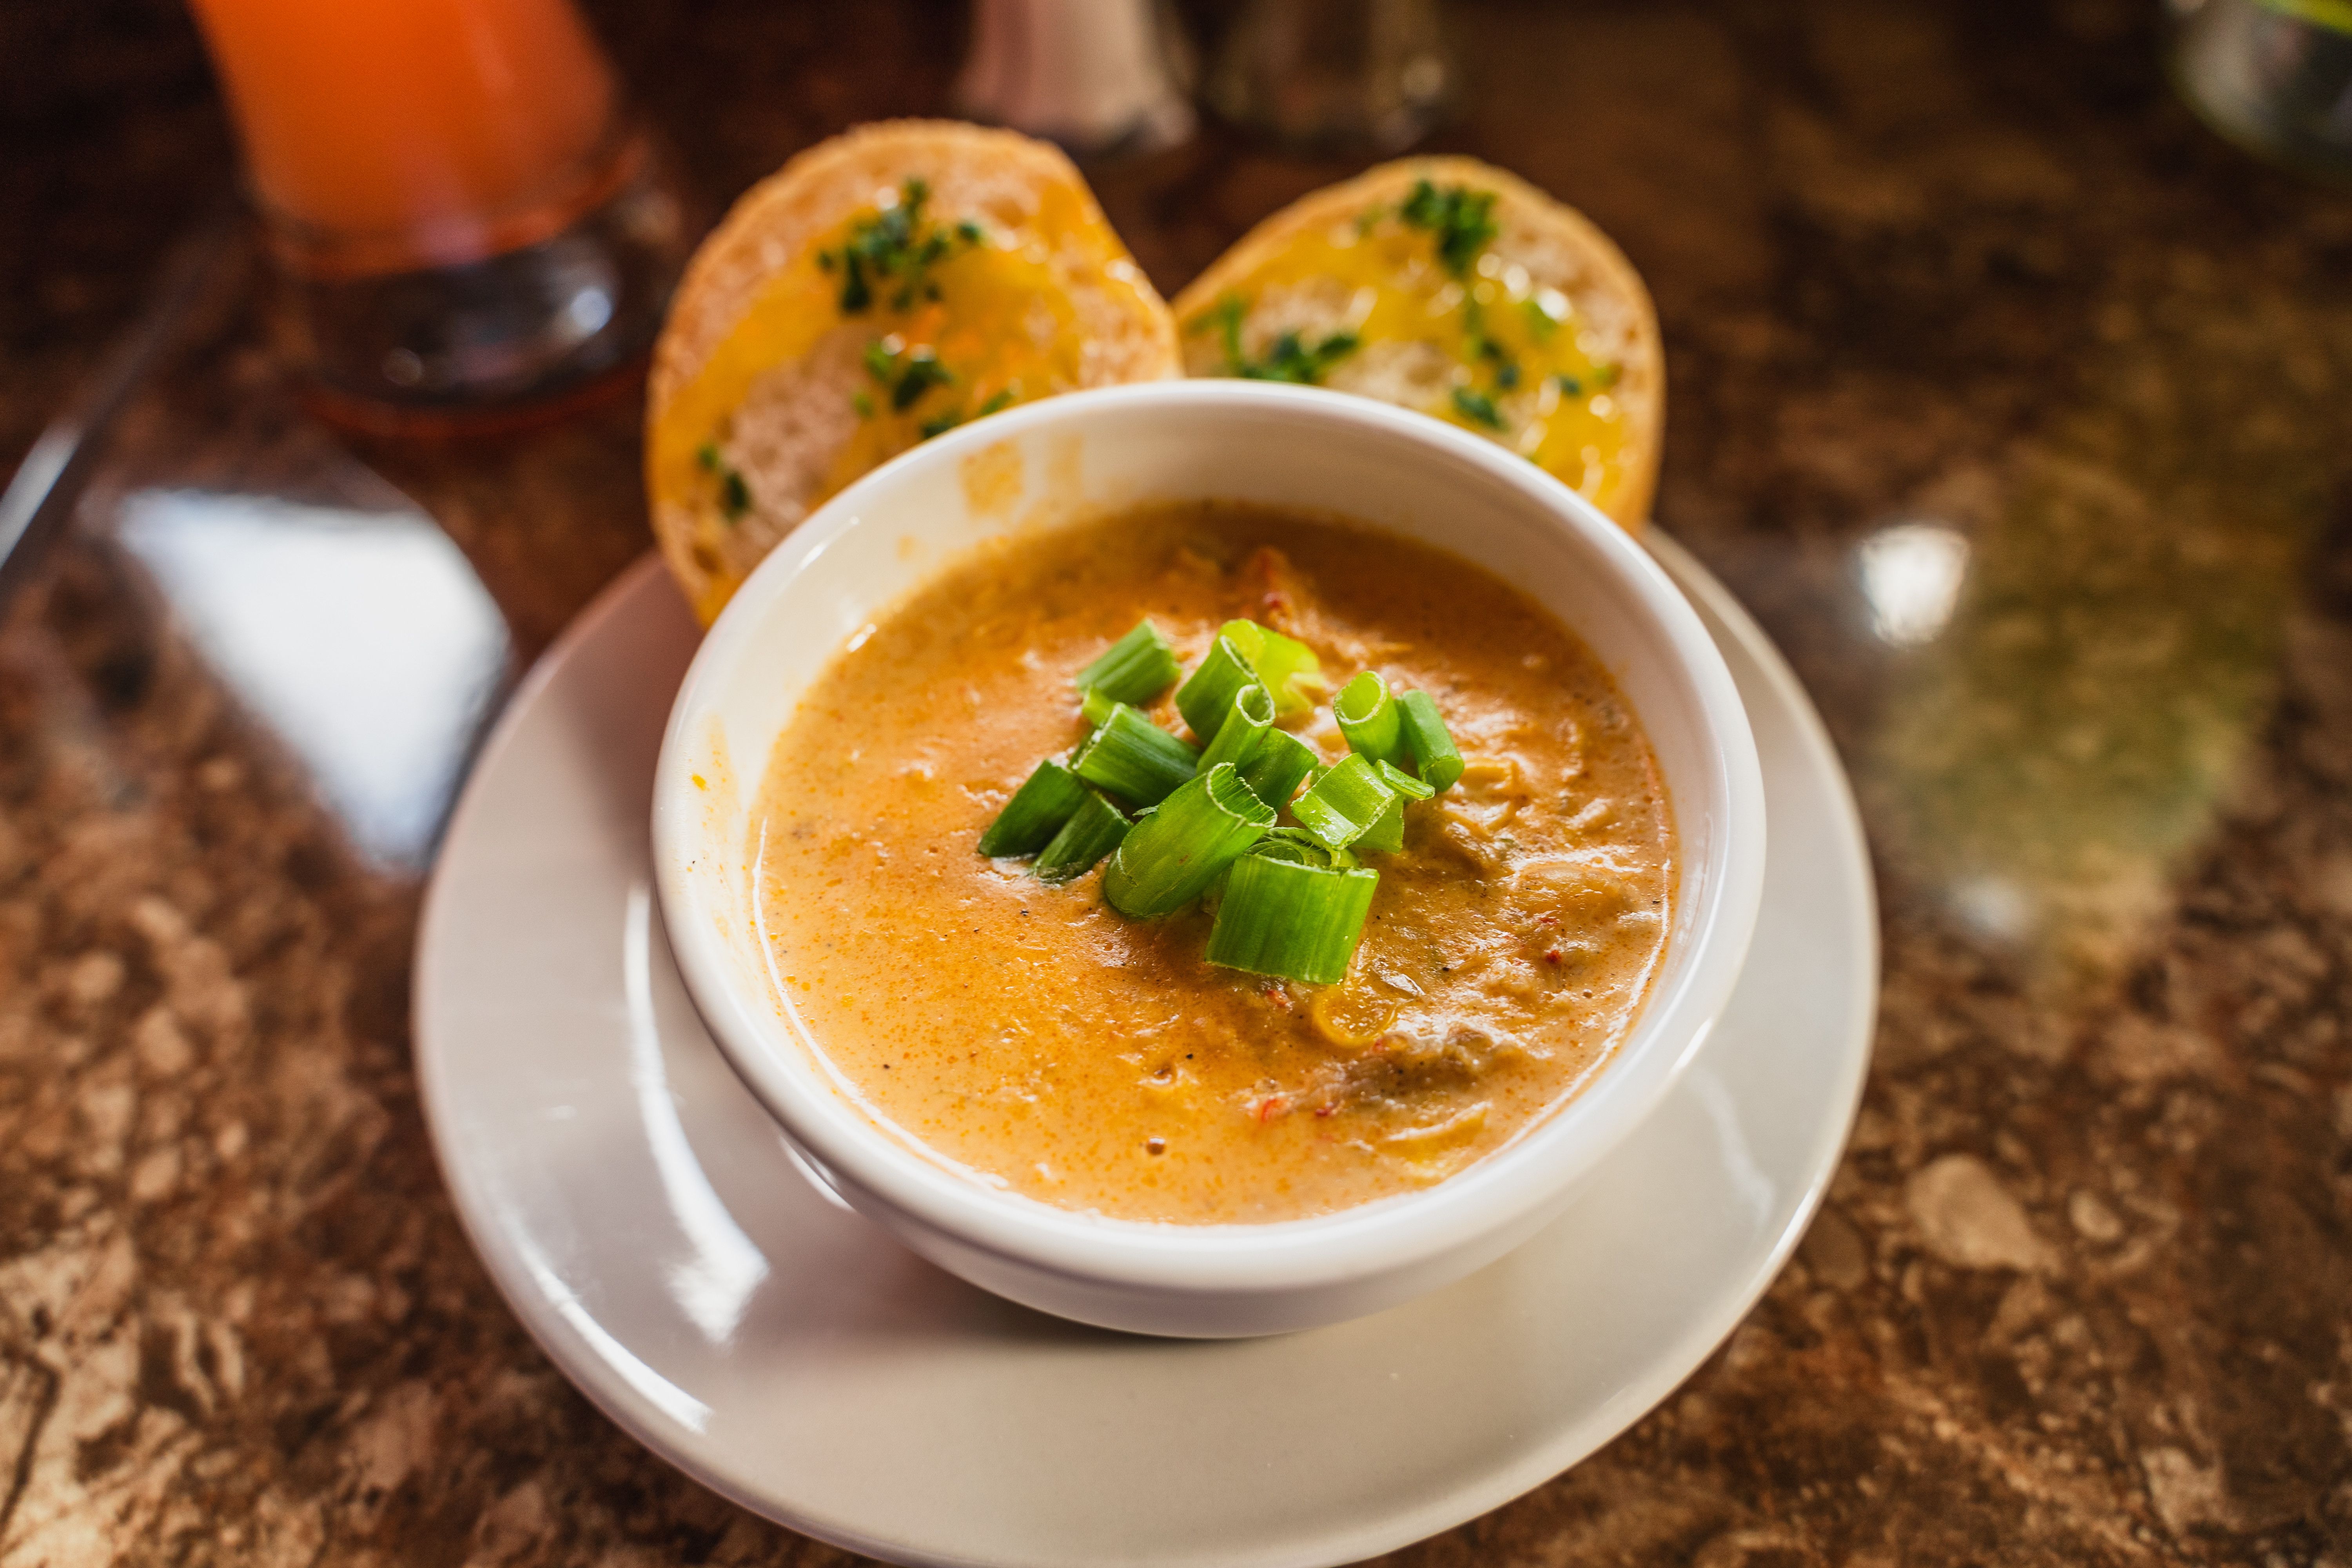 Photo shows bisque in a bowl served with bread